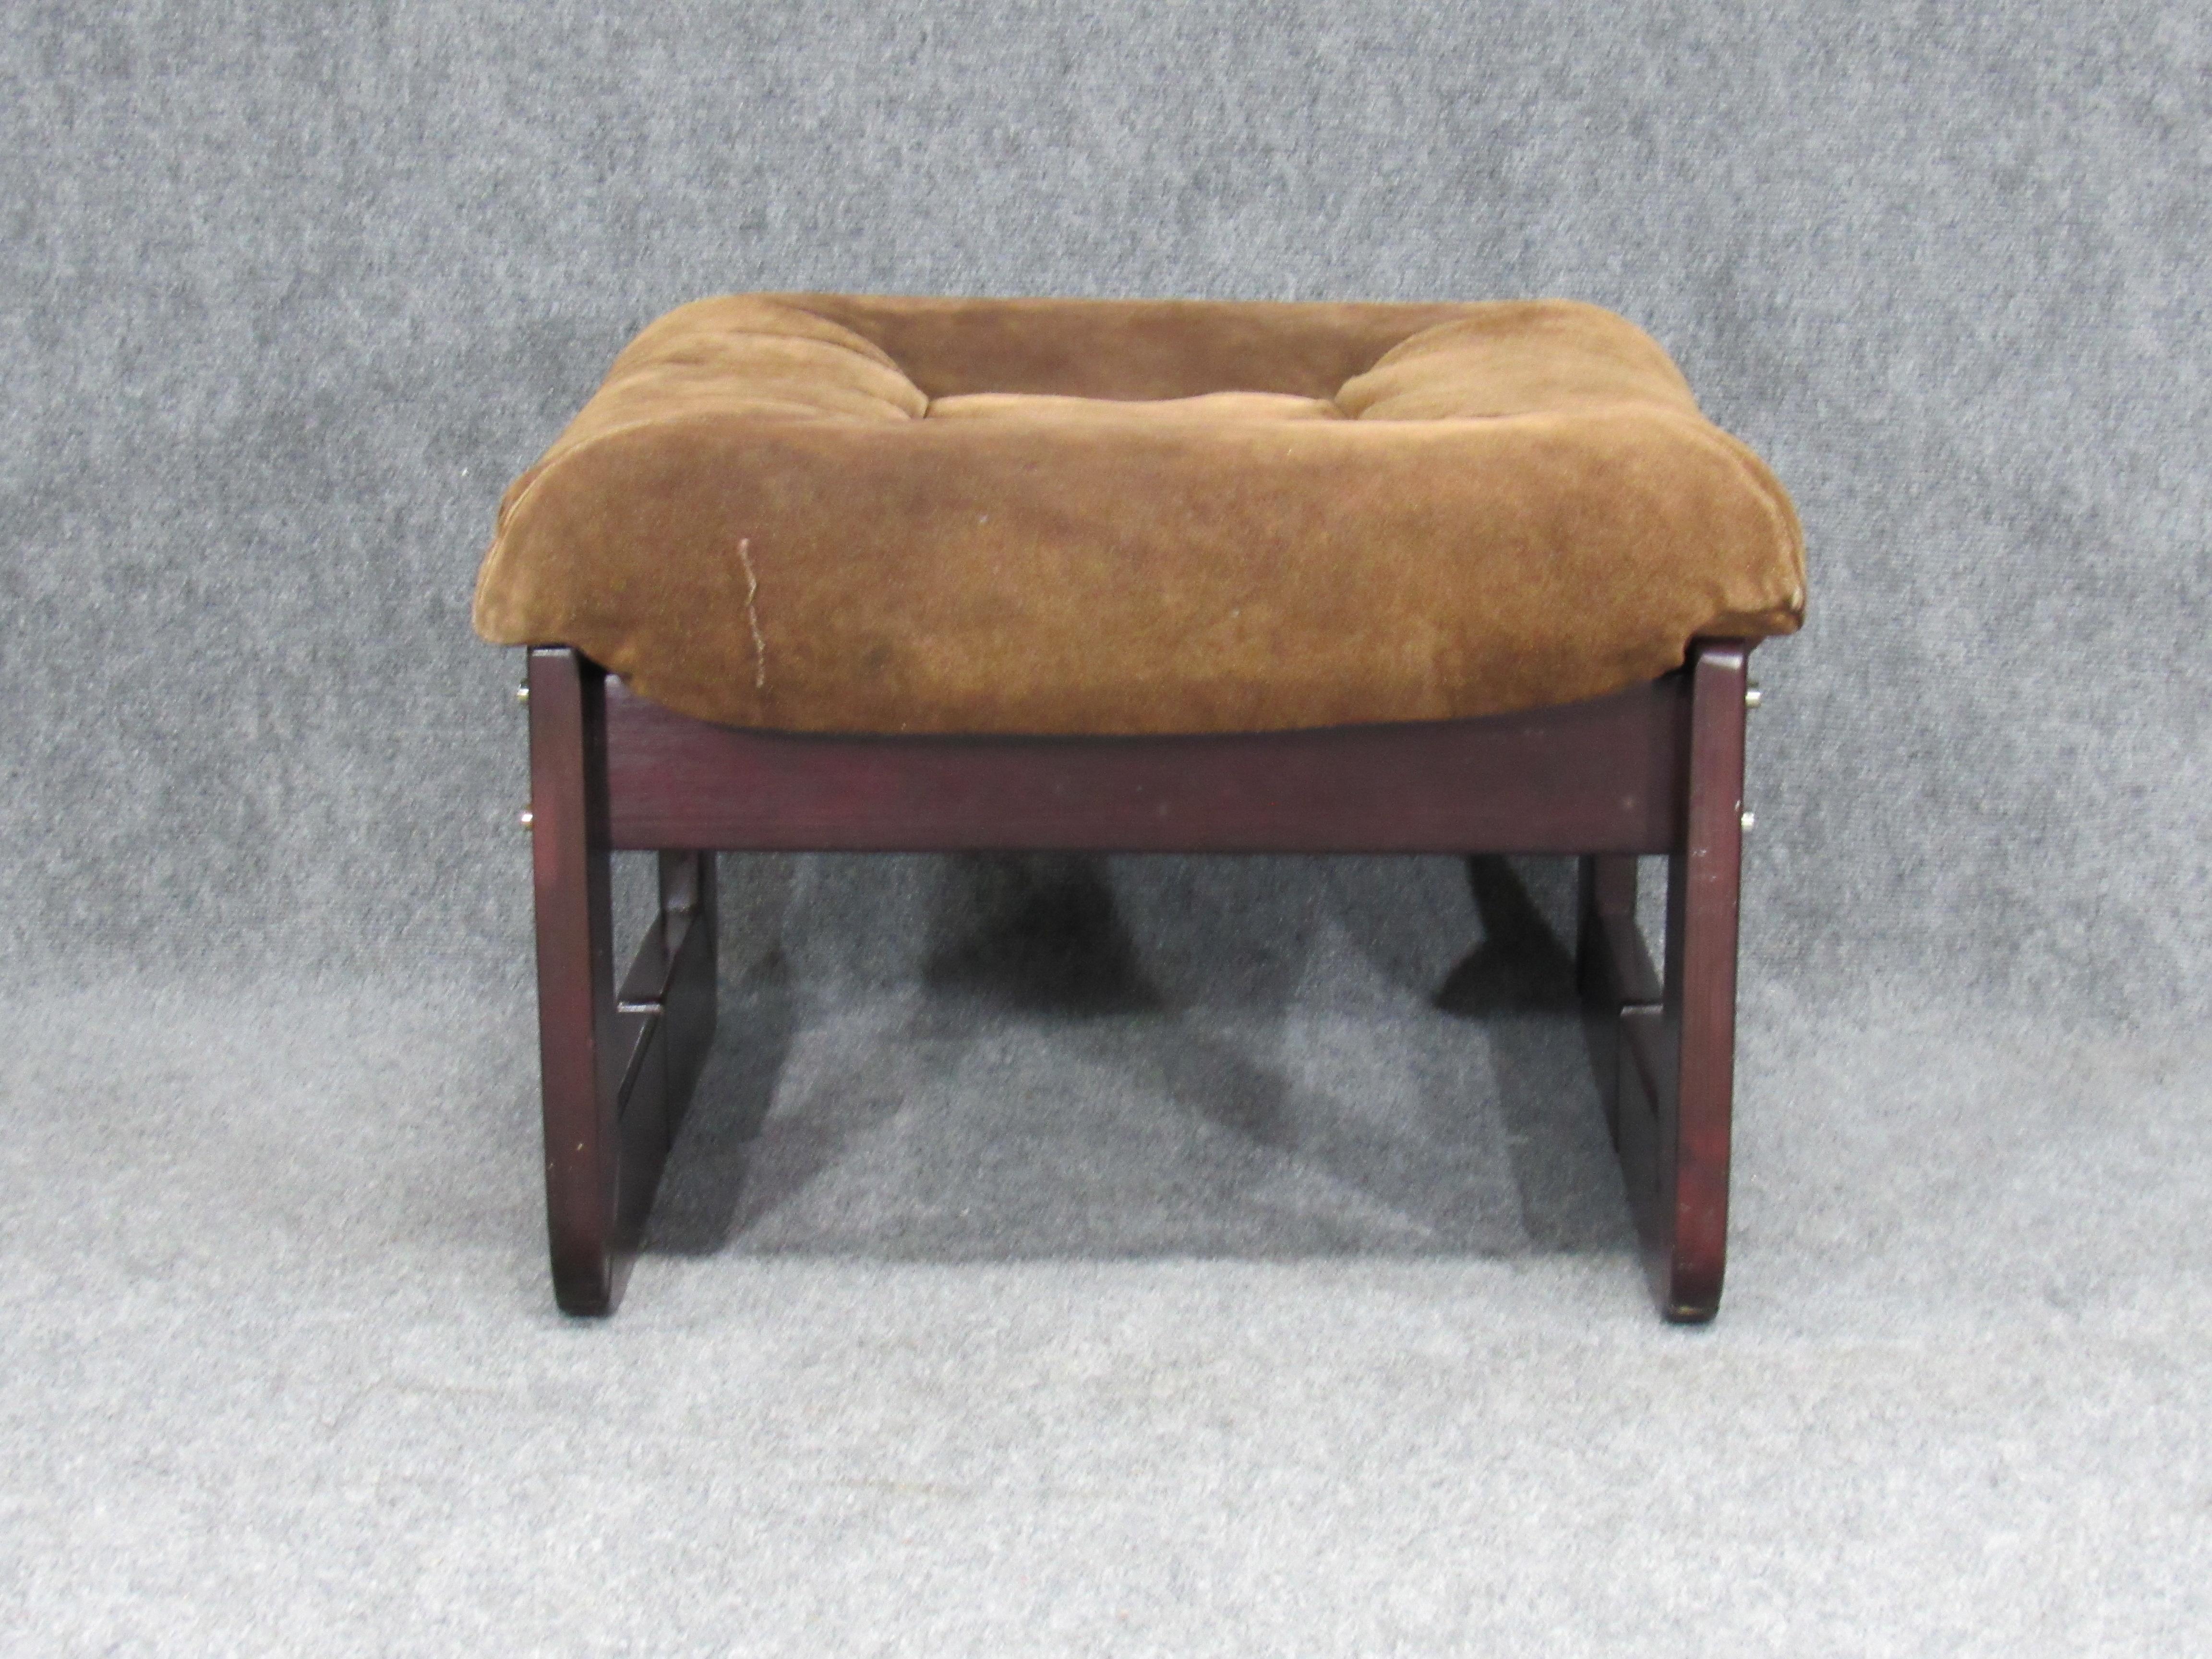 Brazilian Mid-Century Modern armchair and ottoman by Percival Lafer in chocolate brown suede and rosewood. Ottoman measures: 23